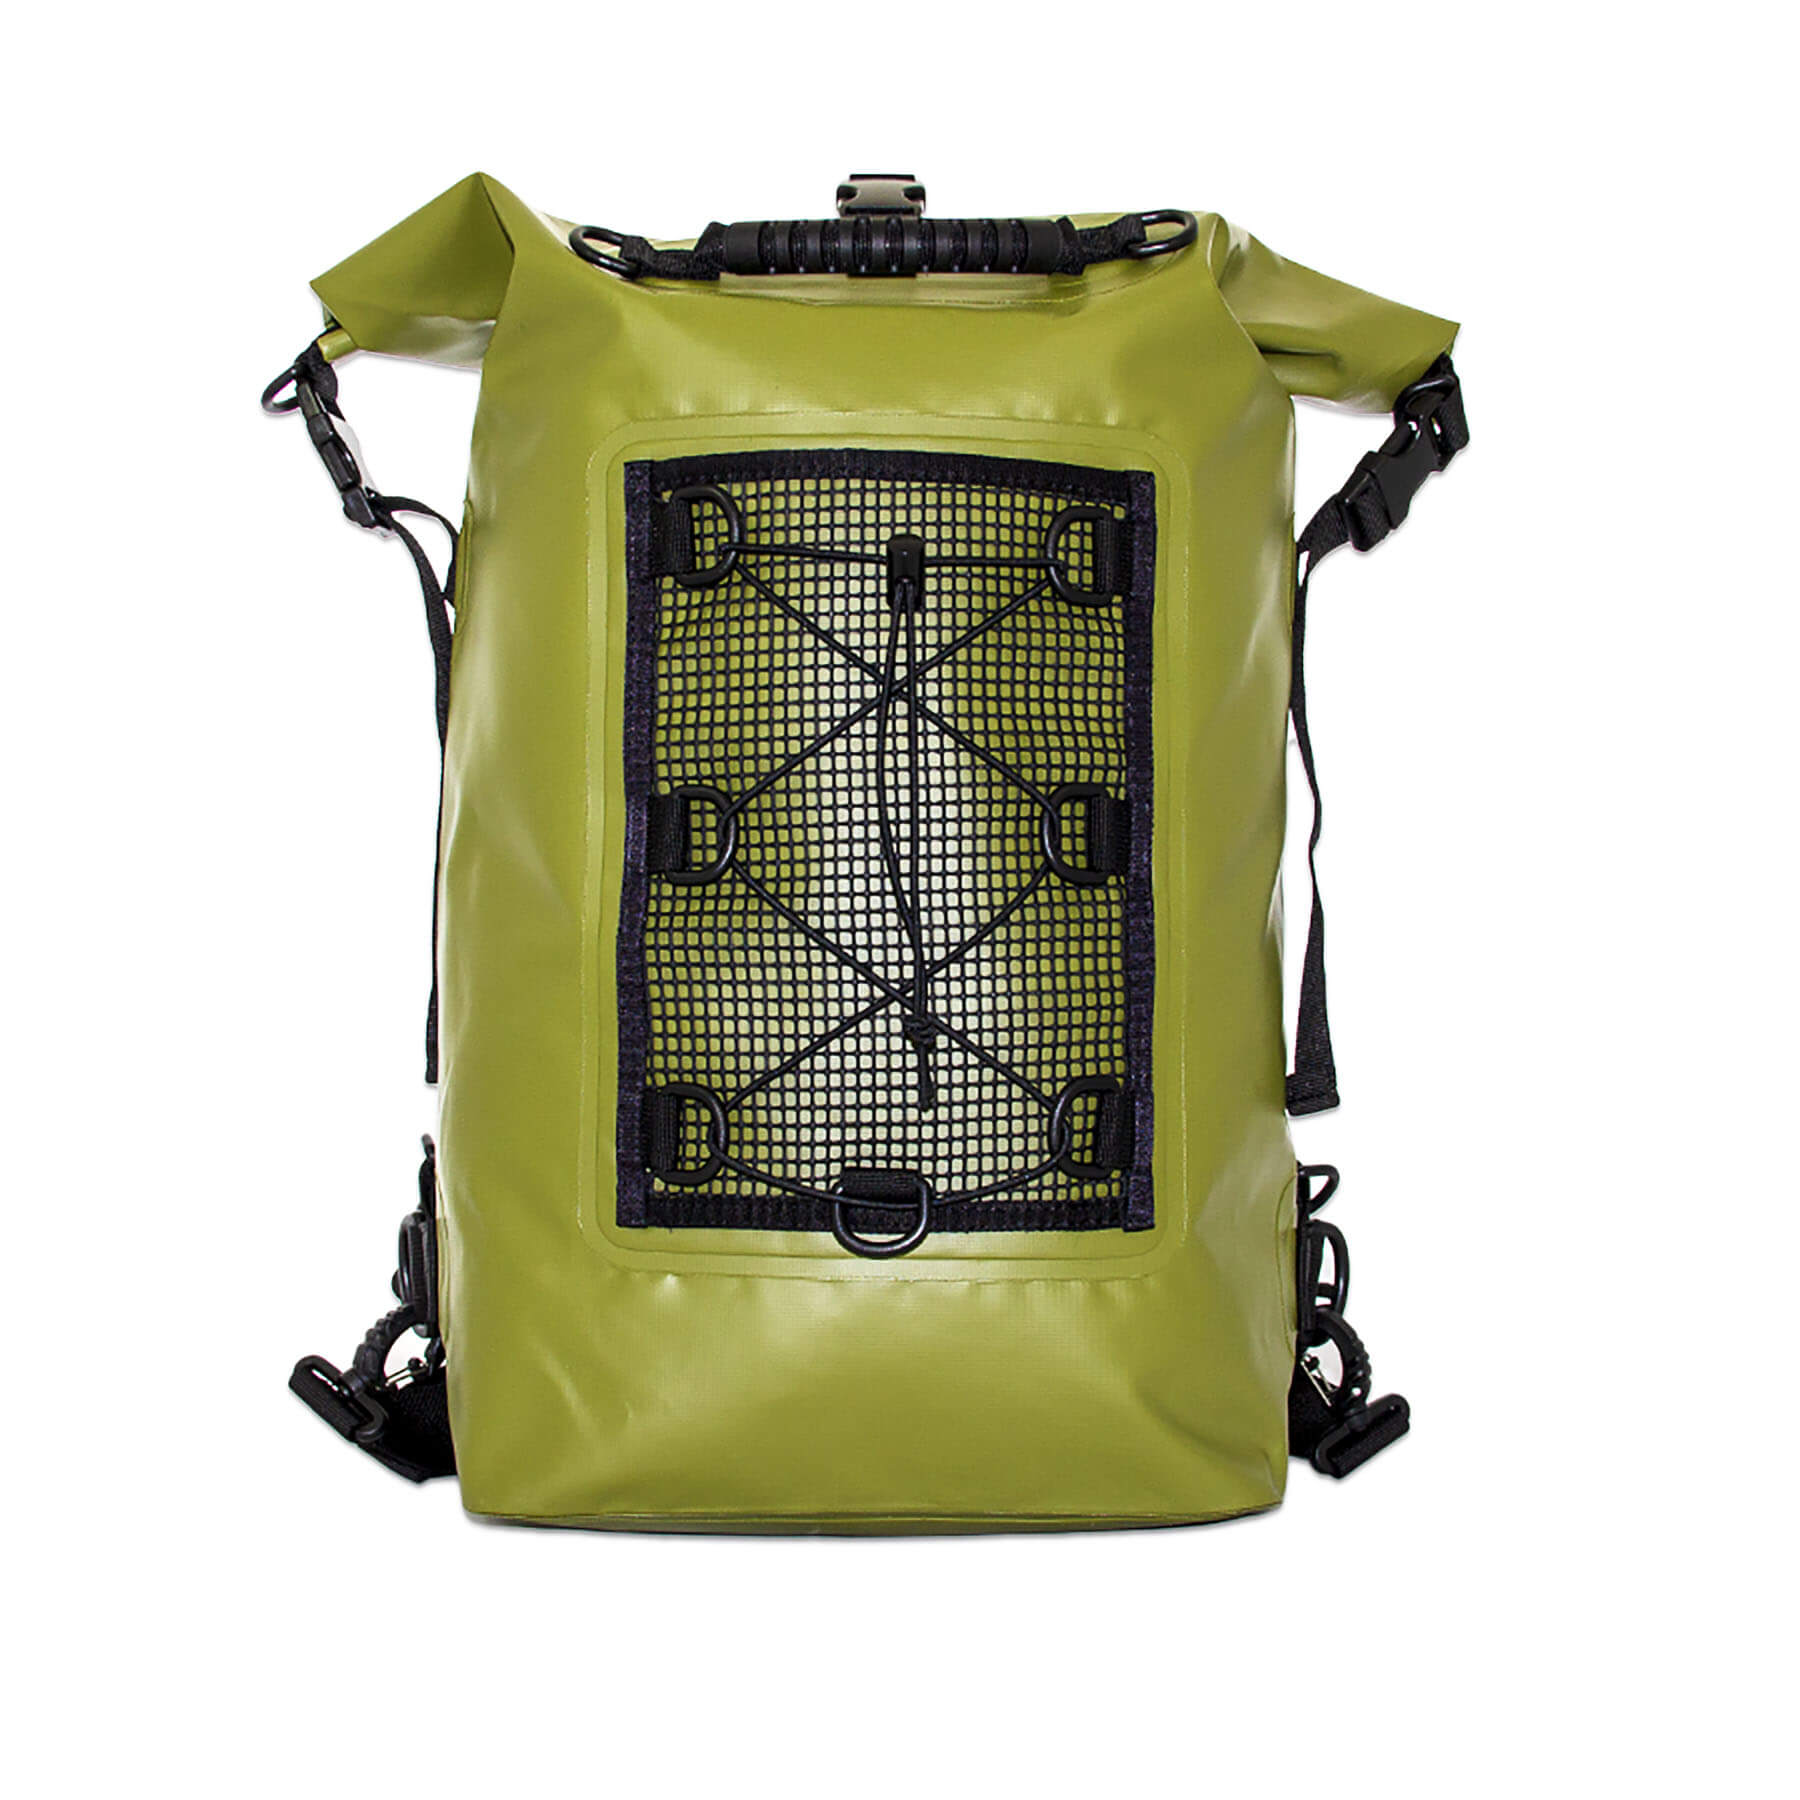 waterproof dry bag backpack 30 litres in olive front view